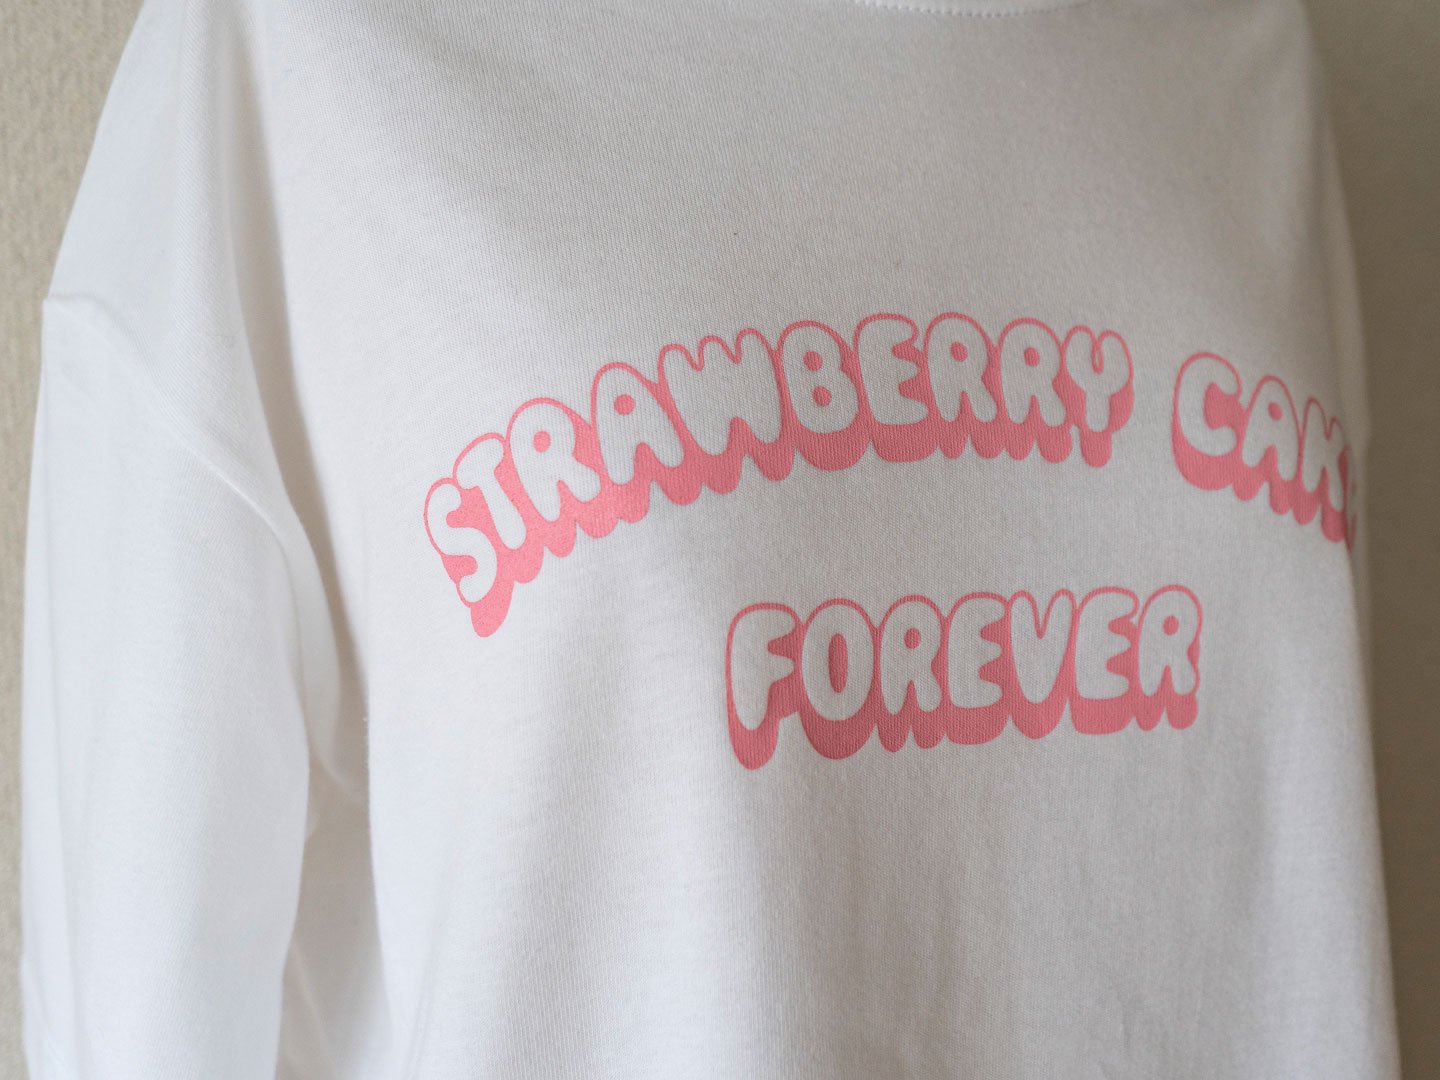 <img class='new_mark_img1' src='https://img.shop-pro.jp/img/new/icons8.gif' style='border:none;display:inline;margin:0px;padding:0px;width:auto;' />T-Shirt「STRAWBERRY CAKES FOREVER」ピンク